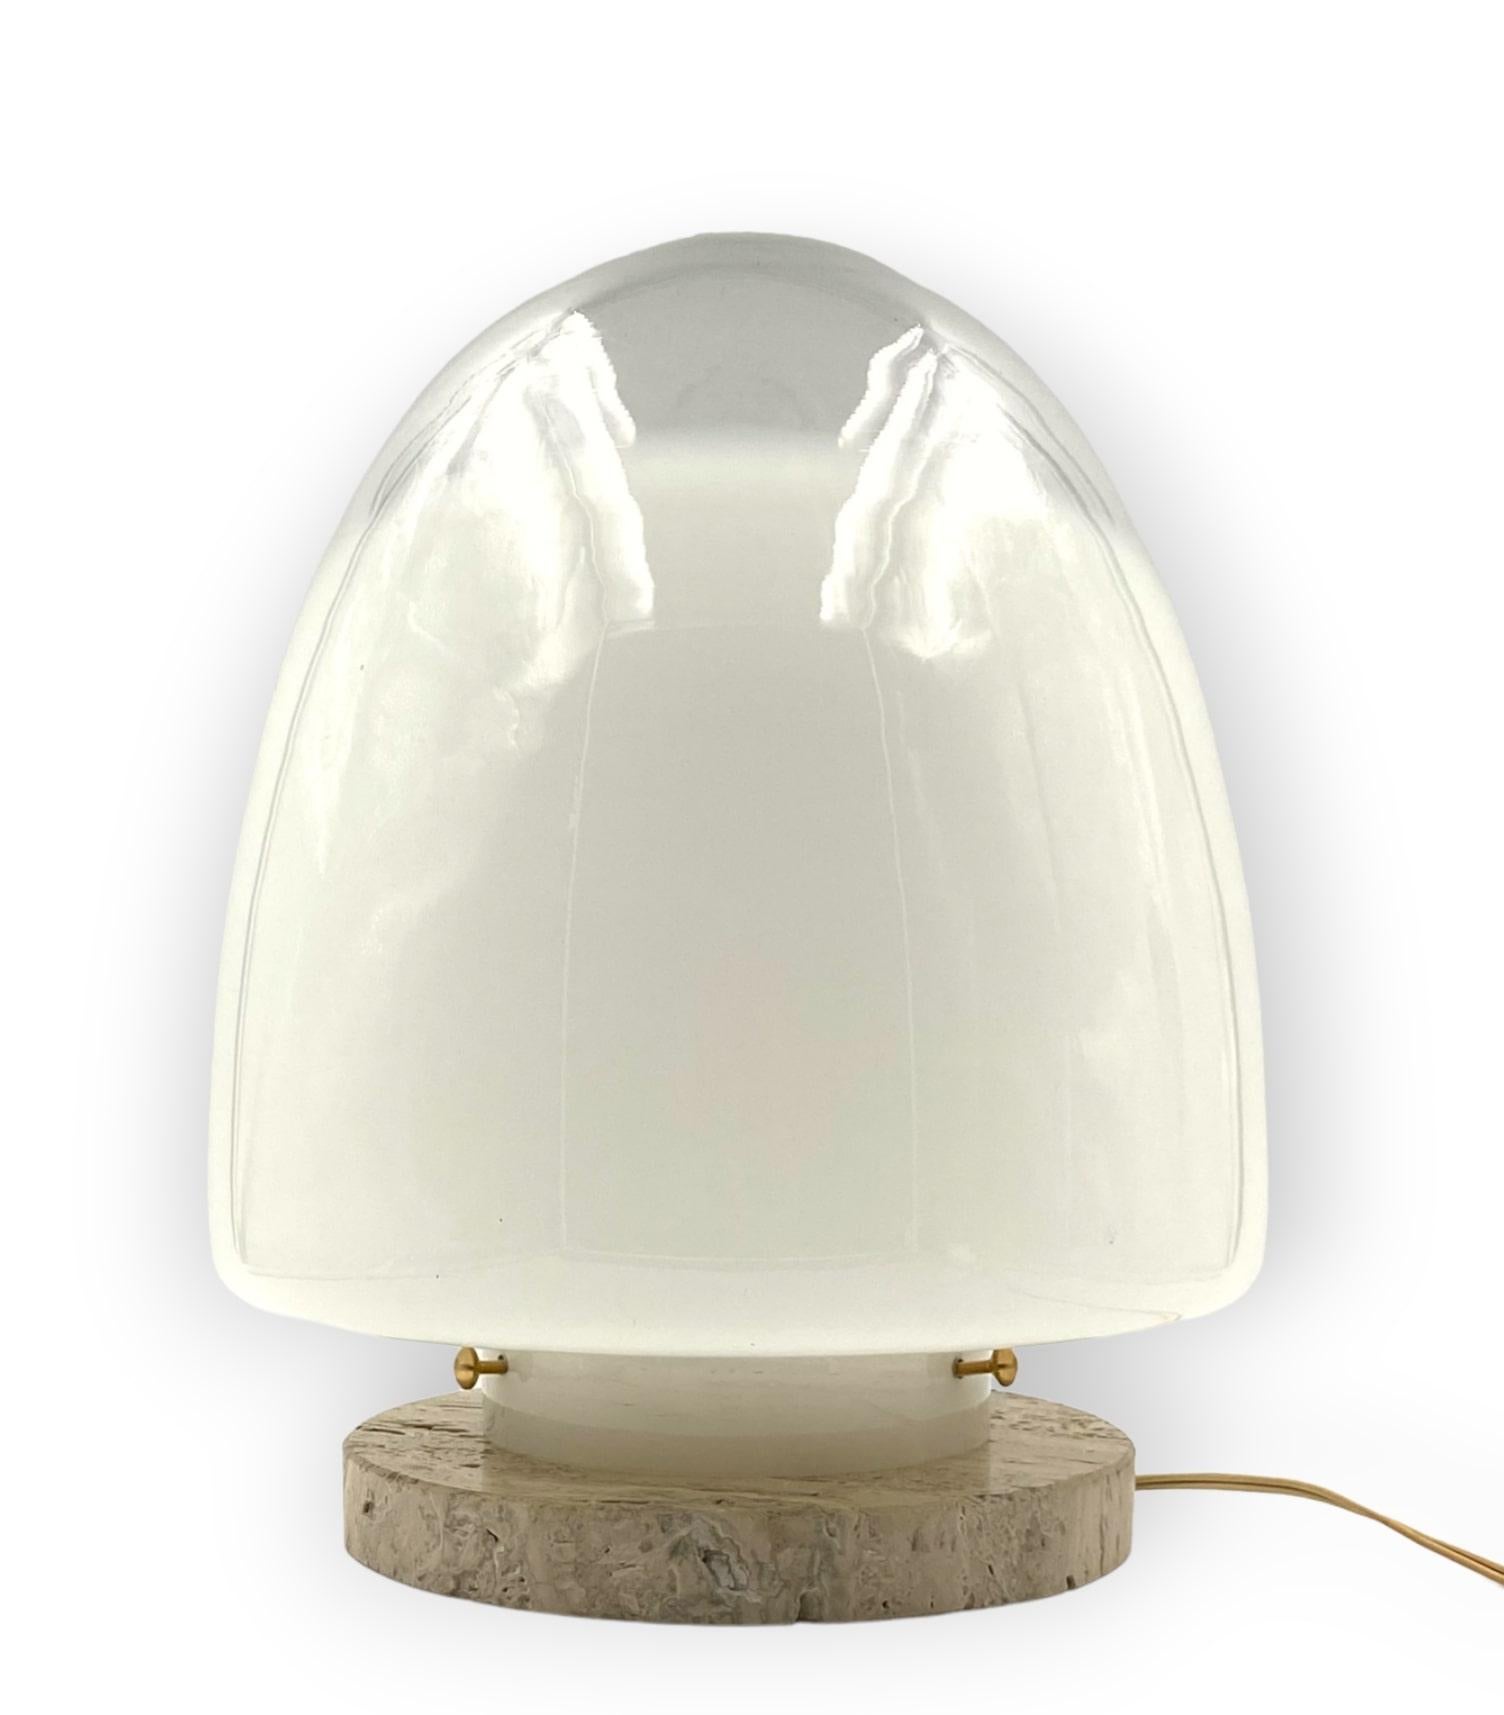 Giusto Toso Murano Art Glass and Travertine Table Lamp, Leucos, Italy, 1970s For Sale 4